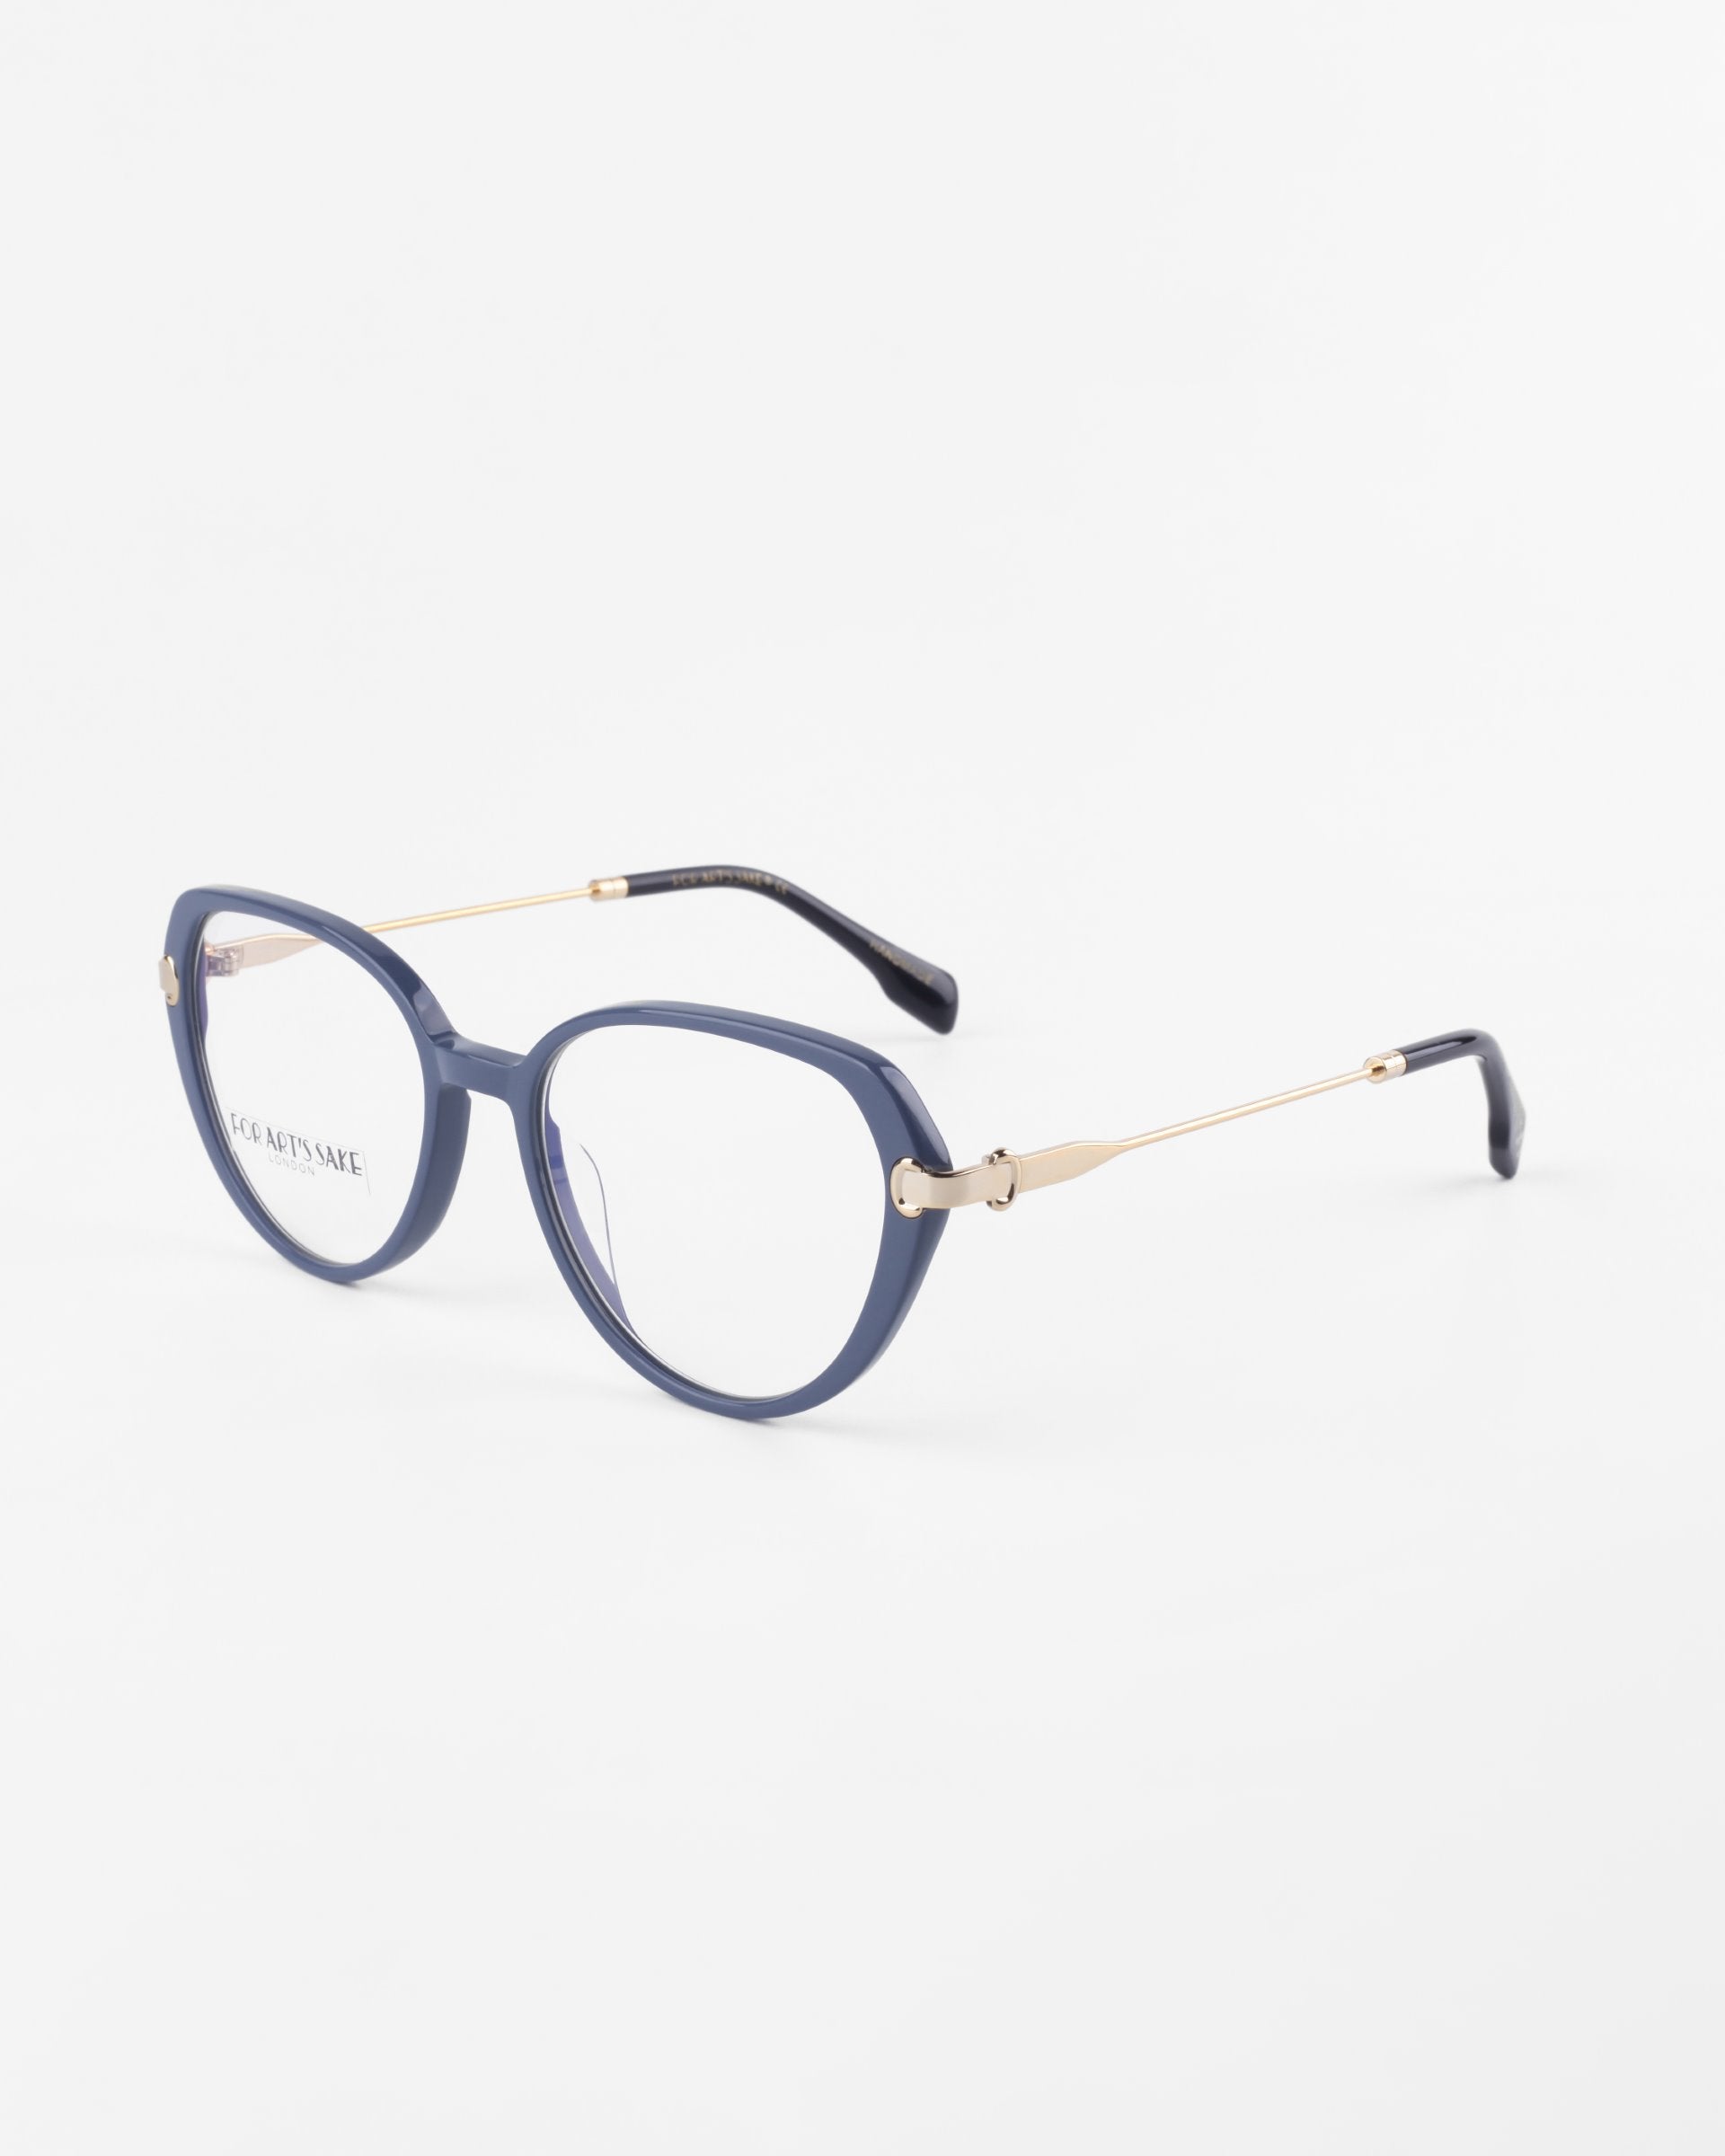 A pair of Waterhouse eyeglasses by For Art&#39;s Sake® with rounded grayish-blue frames, thin 18-karat gold-plated temples, and black ear tips. The glasses have clear prescription lenses and are positioned on a white background.